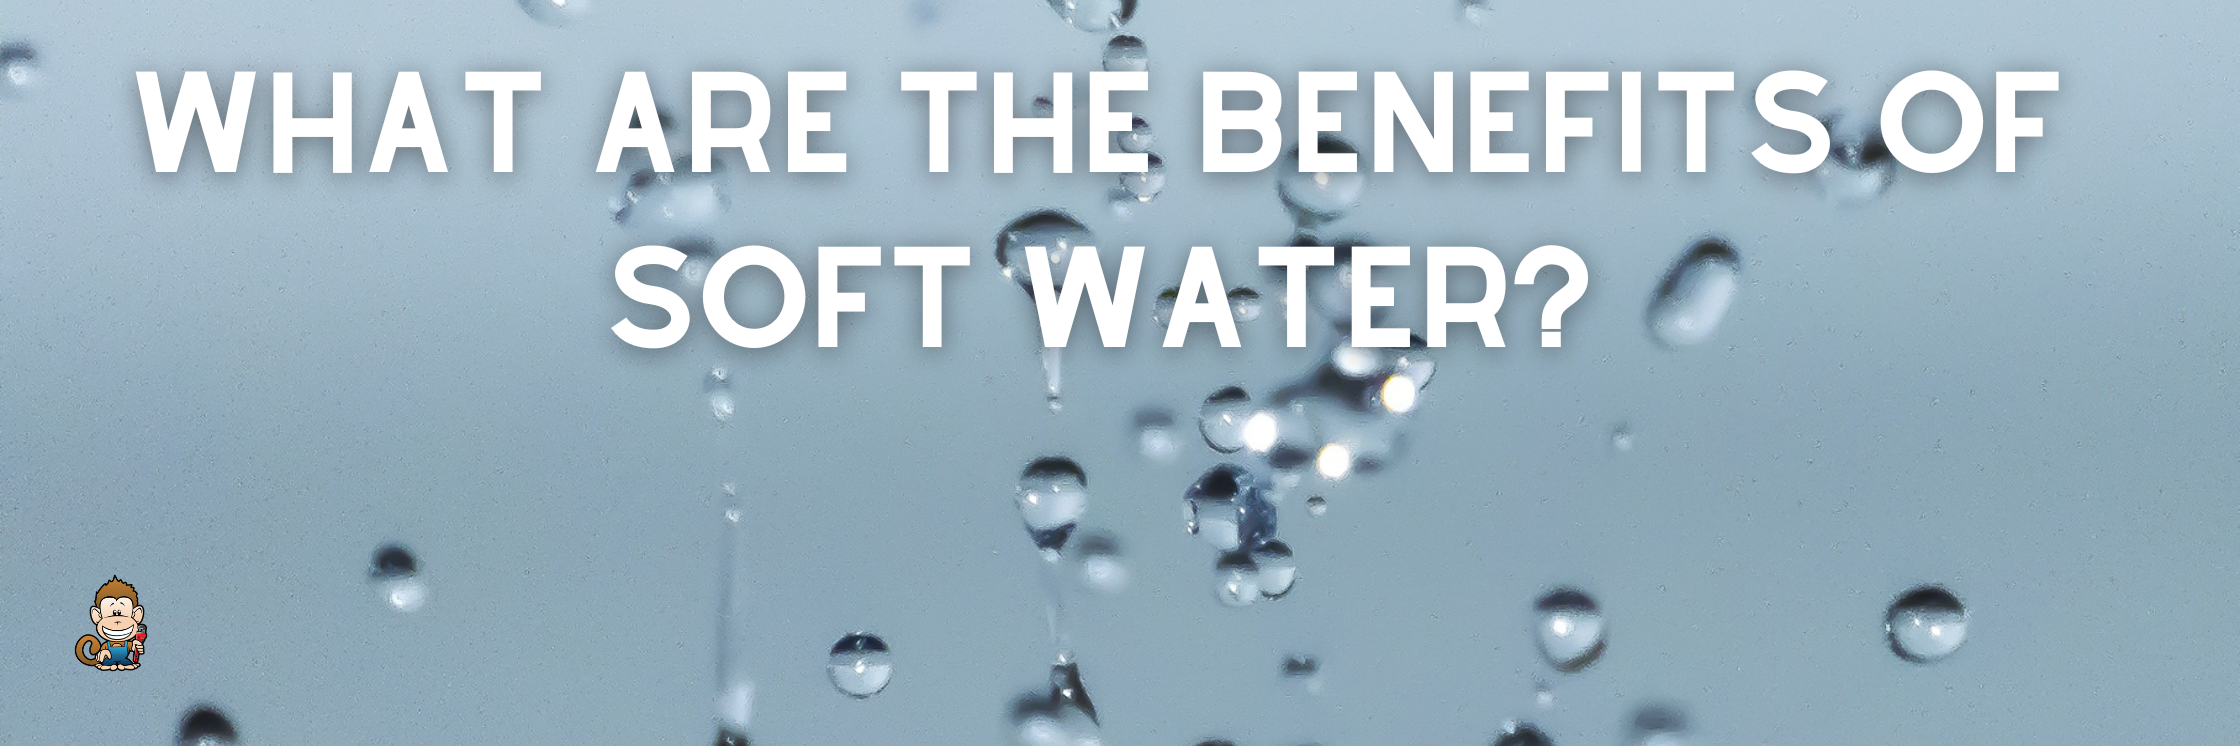 What Are The Benefits of Soft Water? (Video)